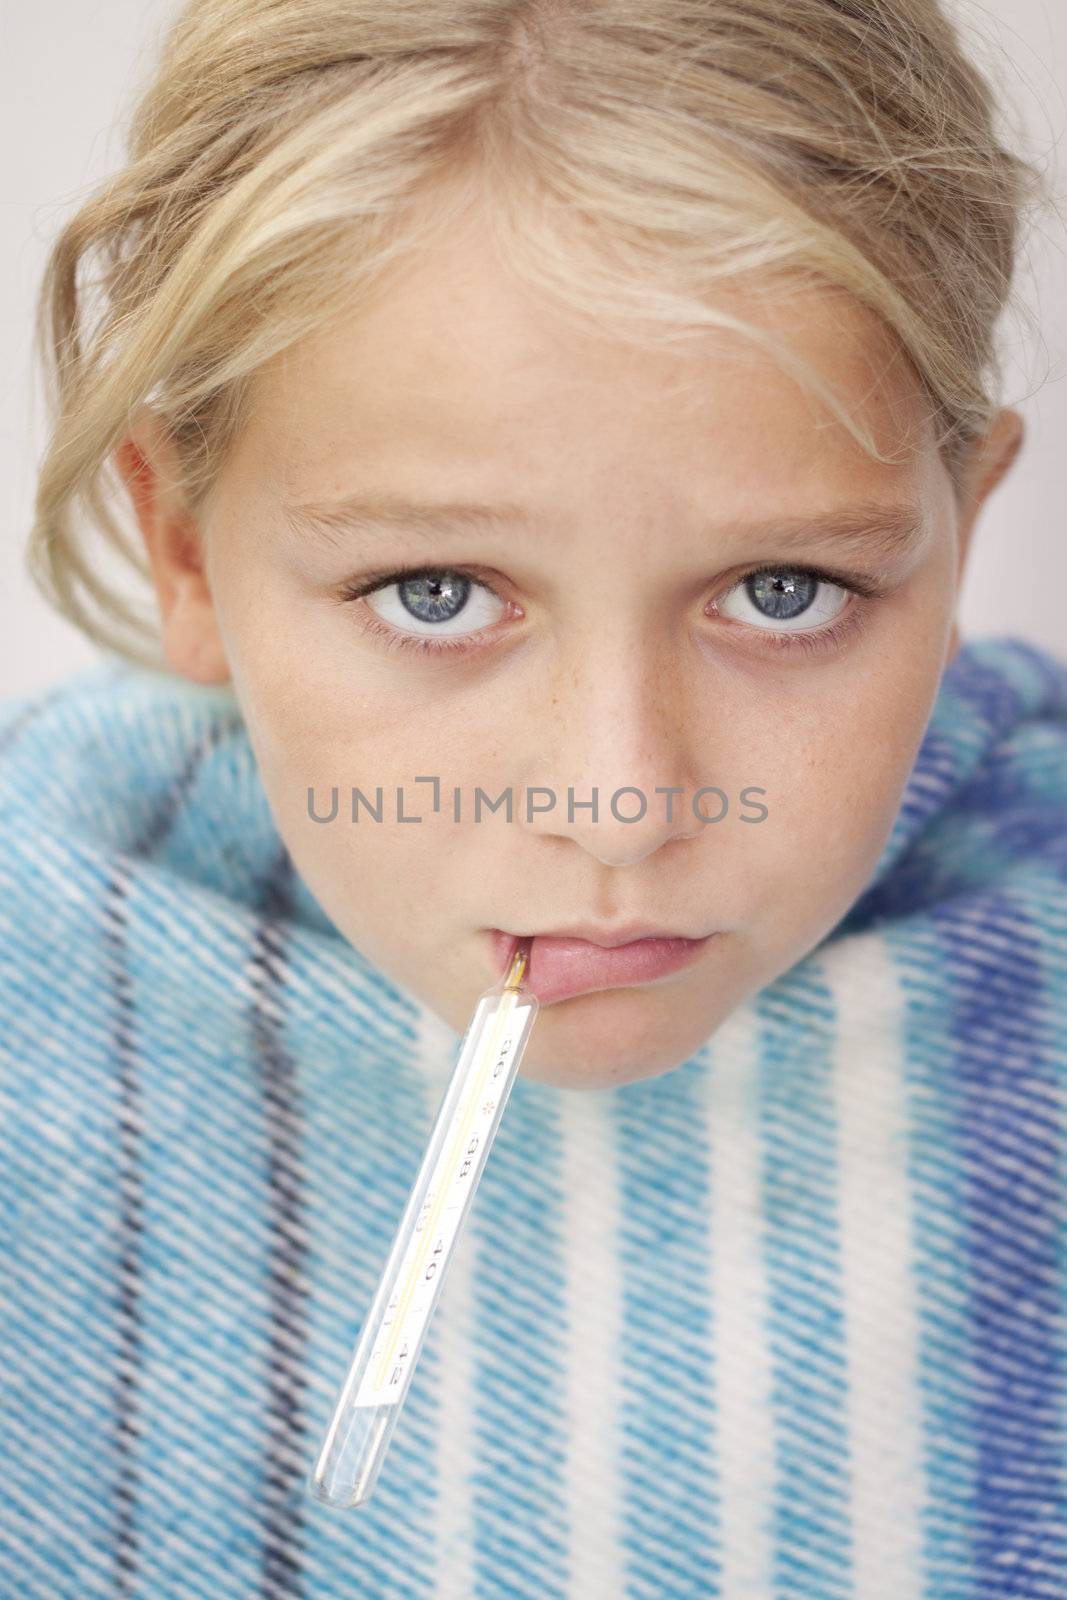 Child with a fever thermometer in her mouth, looking sad and sick